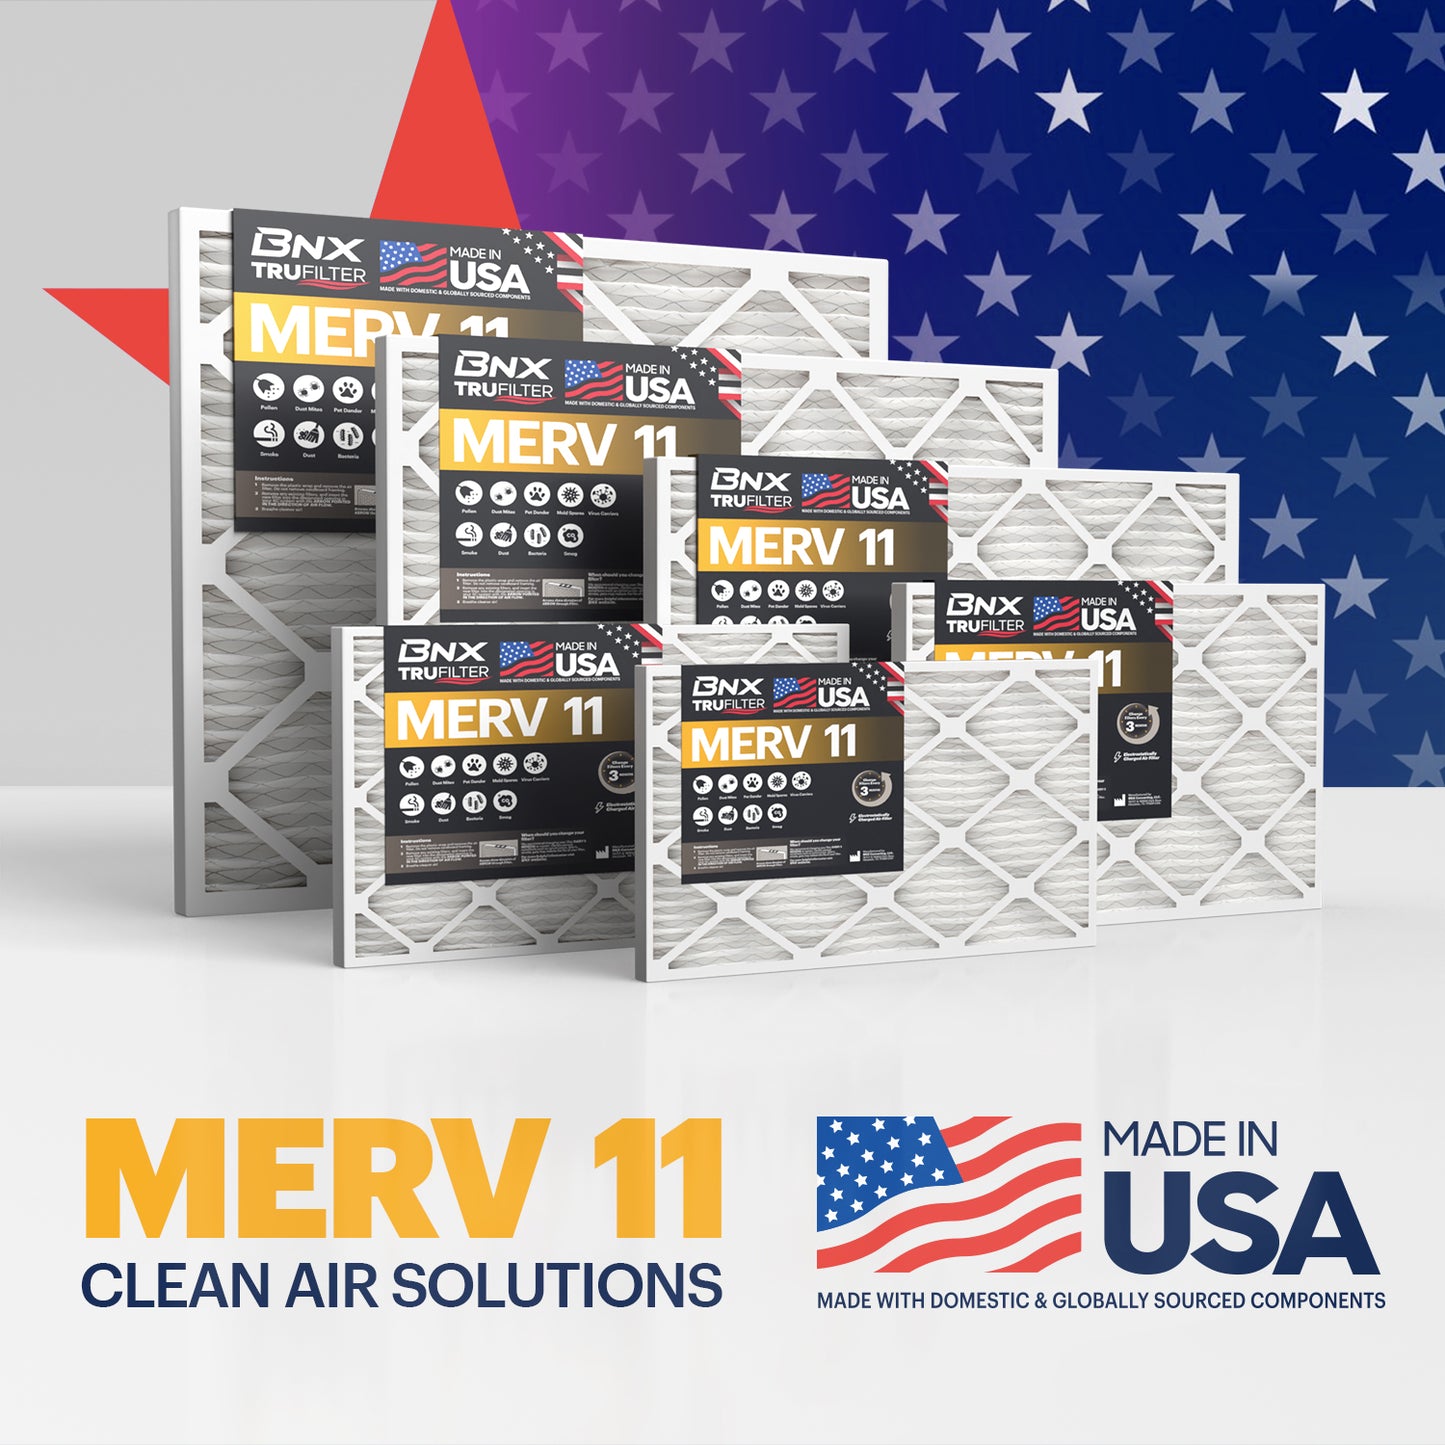 BNX TruFilter 20x22x1 Air Filter MERV 11 (6-Pack) - MADE IN USA - Allergen Defense Electrostatic Pleated Air Conditioner HVAC AC Furnace Filters for Allergies, Dust, Pet, Smoke, Allergy MPR 1200 FPR 7